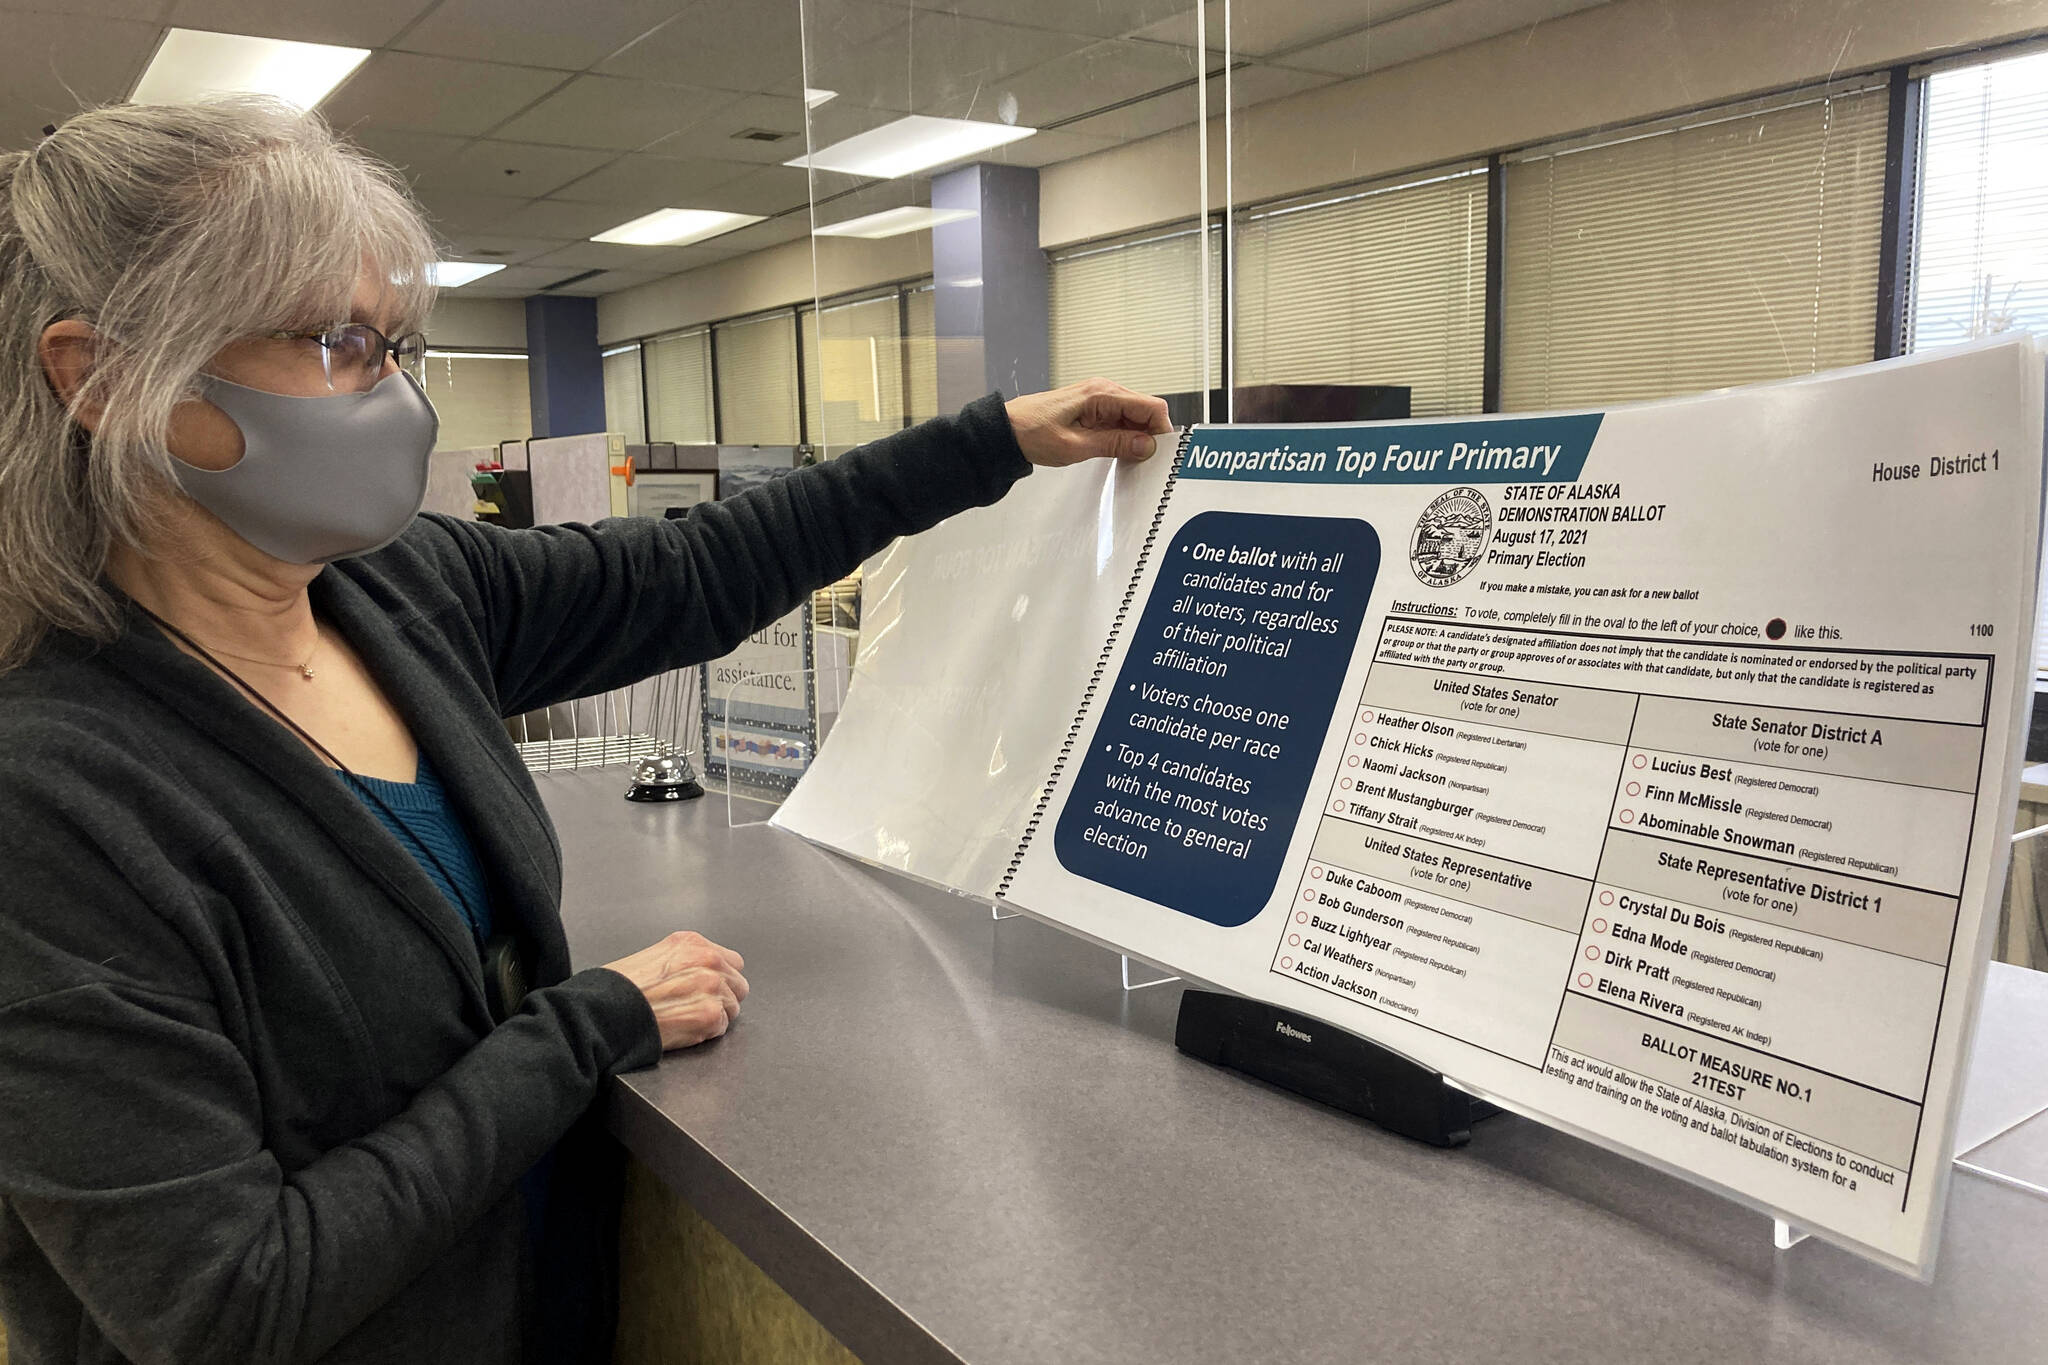 AP Photo / Mark Thiessen
Deborah Moody, an administrative clerk at the Alaska Division of Elections office in Anchorage, Alaska, looks at an oversized booklet explaining election changes in the state on Jan. 21, 2022. Alaska elections will be held for the first time this year under a voter-backed system that scraps party primaries and sends the top four vote-getters regardless of party to the general election, where ranked choice voting will be used to determine a winner. No other state conducts its elections with that same combination.